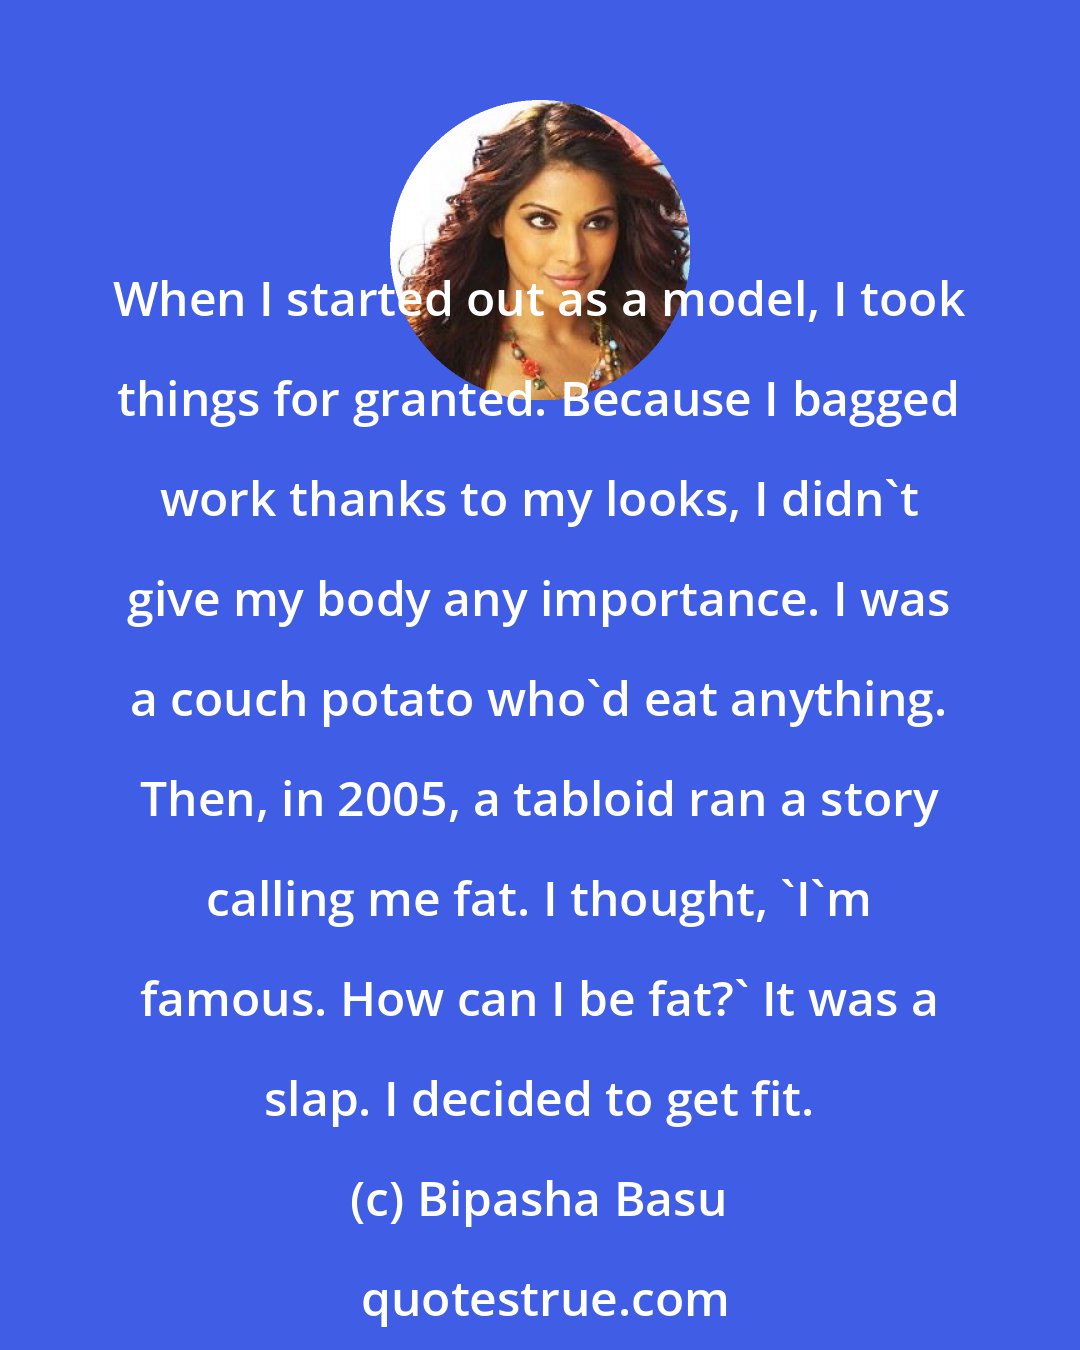 Bipasha Basu: When I started out as a model, I took things for granted. Because I bagged work thanks to my looks, I didn't give my body any importance. I was a couch potato who'd eat anything. Then, in 2005, a tabloid ran a story calling me fat. I thought, 'I'm famous. How can I be fat?' It was a slap. I decided to get fit.